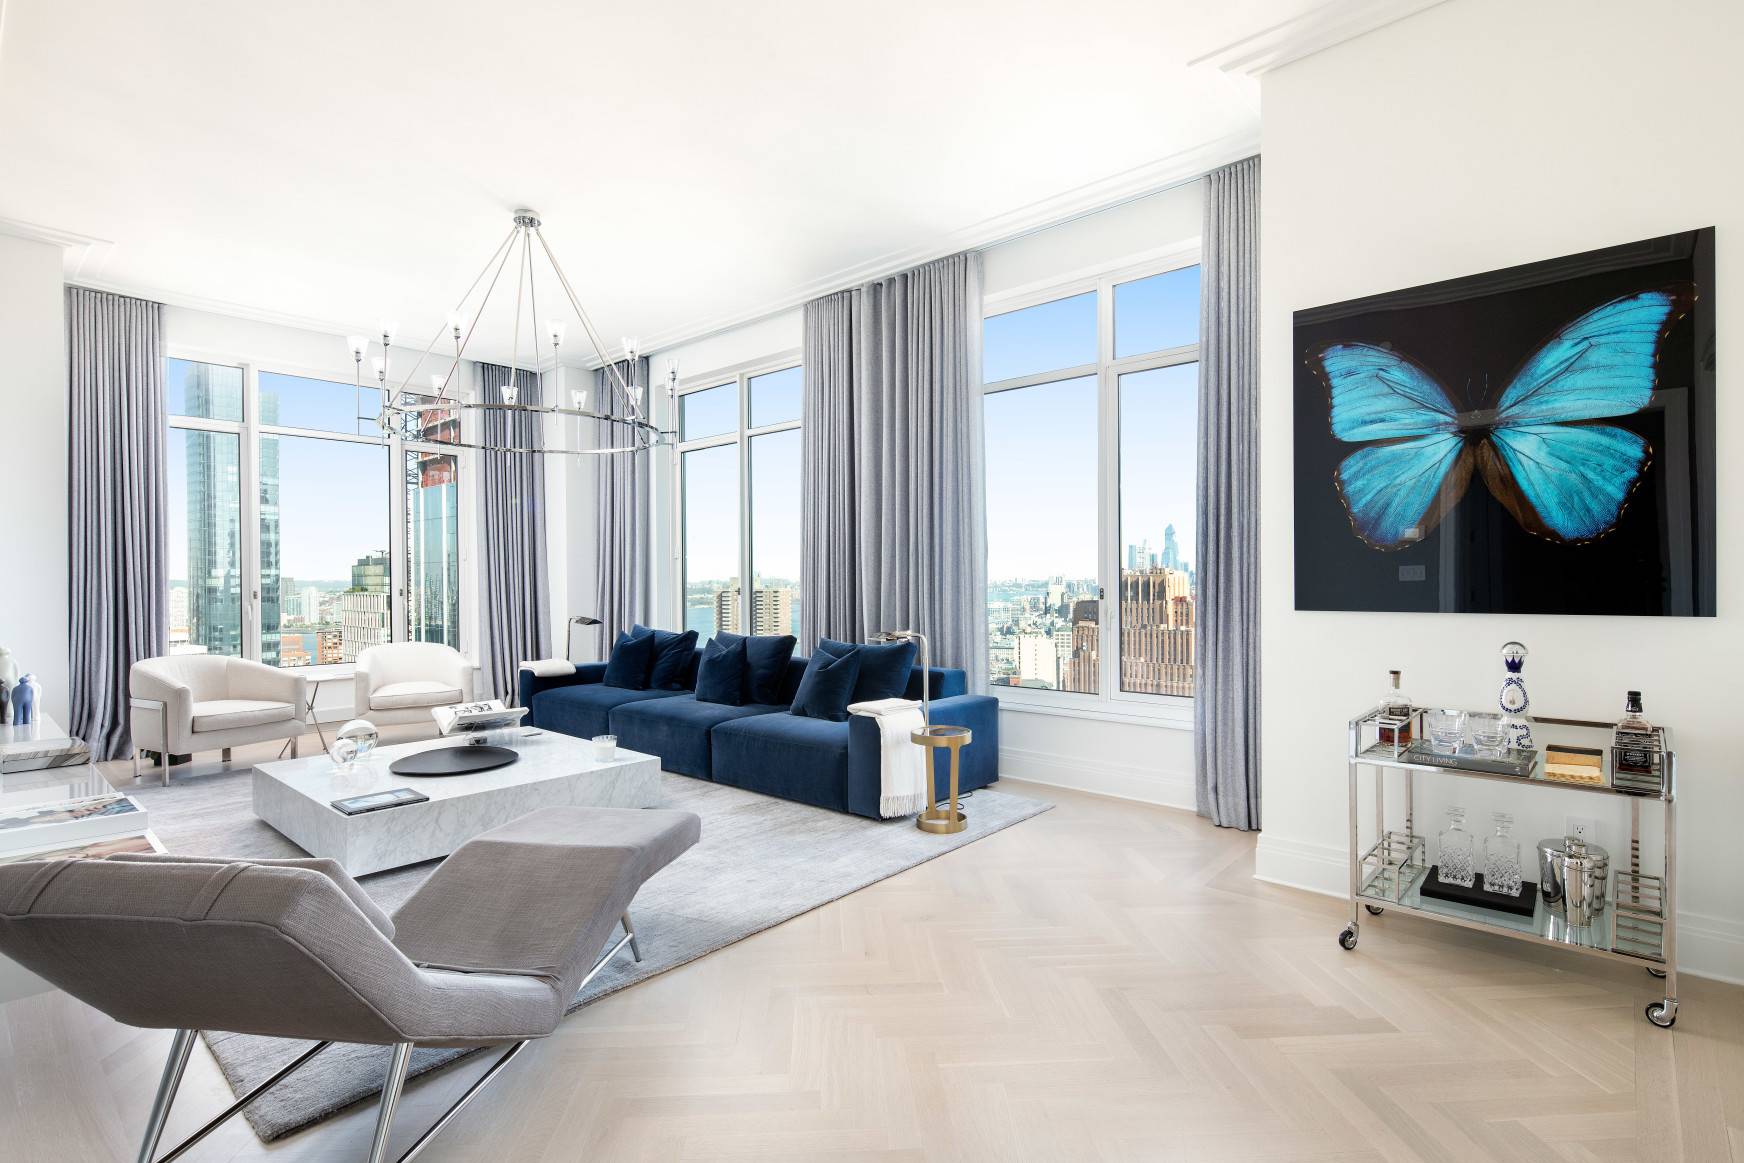 OFFERED FULLY FURNISHED amp ; UPGRADED THROUGHOUT Welcome to 5 star living at 30 Park Place, Four Seasons Private Residences New York, Downtown.